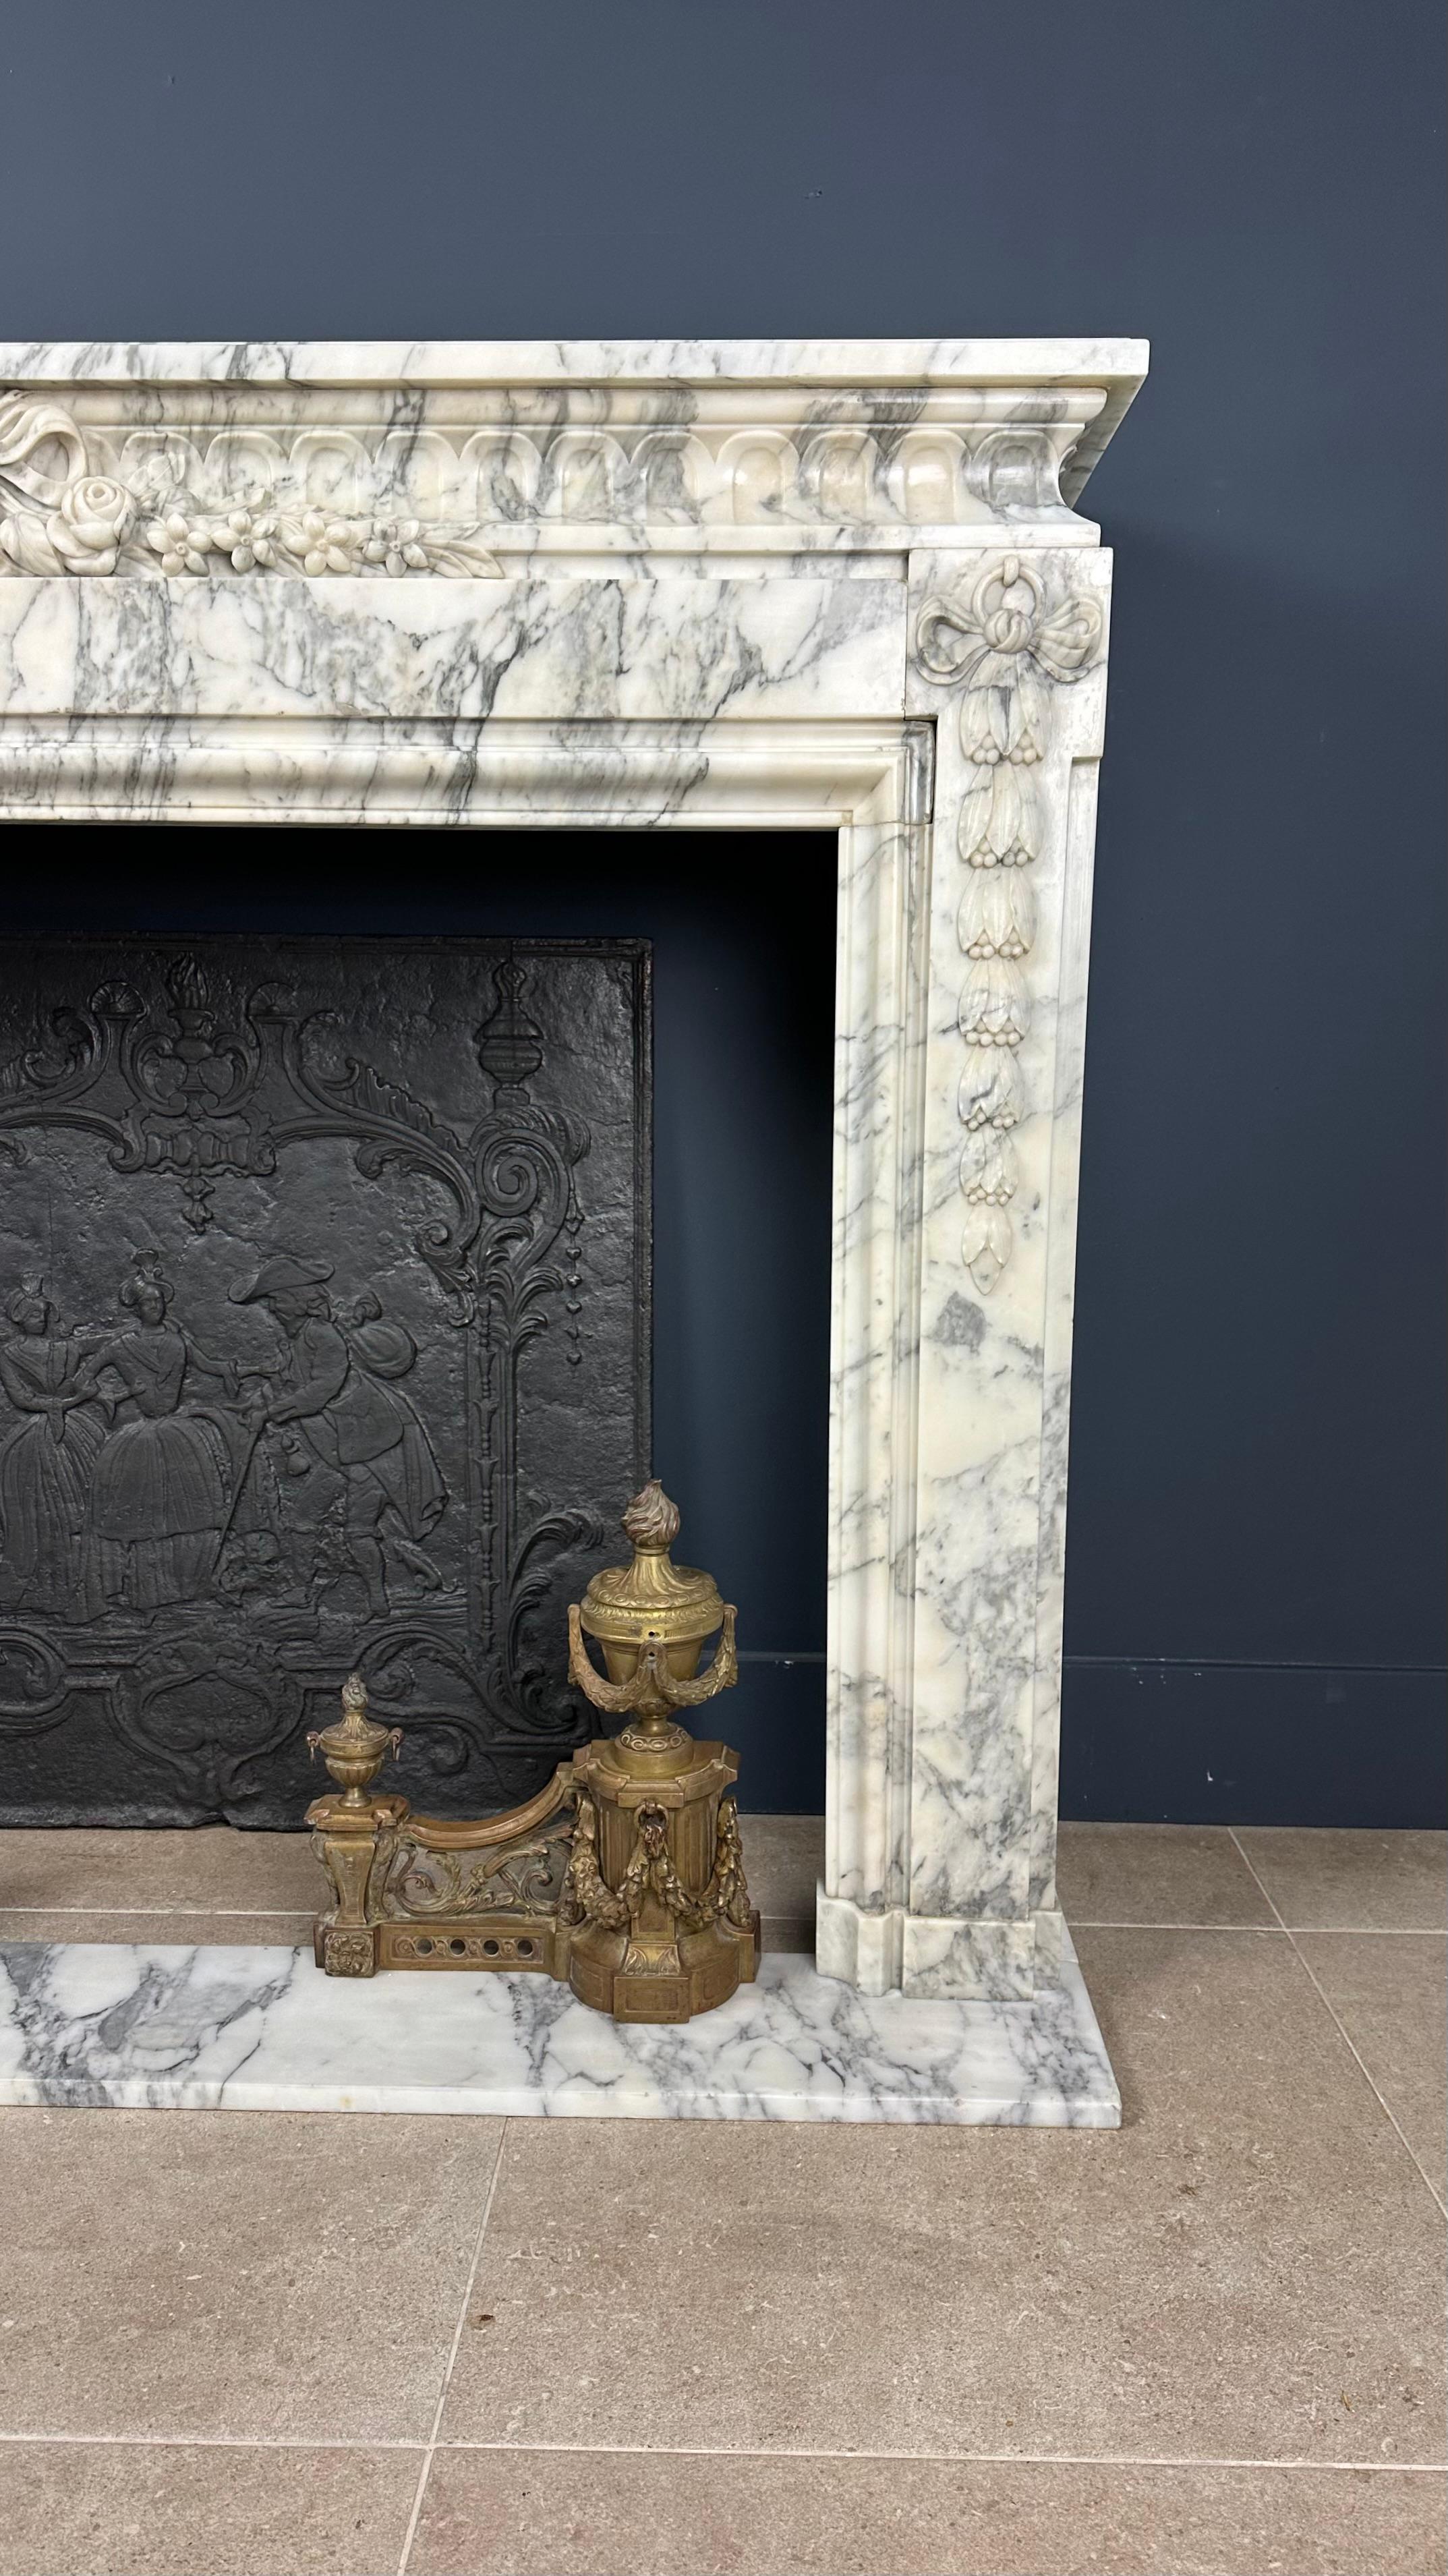 Introducing Our Personal Favorite: The Epitome of Elegance and Craftsmanship

Experience the epitome of sophistication with our meticulously crafted fireplace mantel. A harmonious blend of elegance, style, and artisanal mastery, this exquisite piece